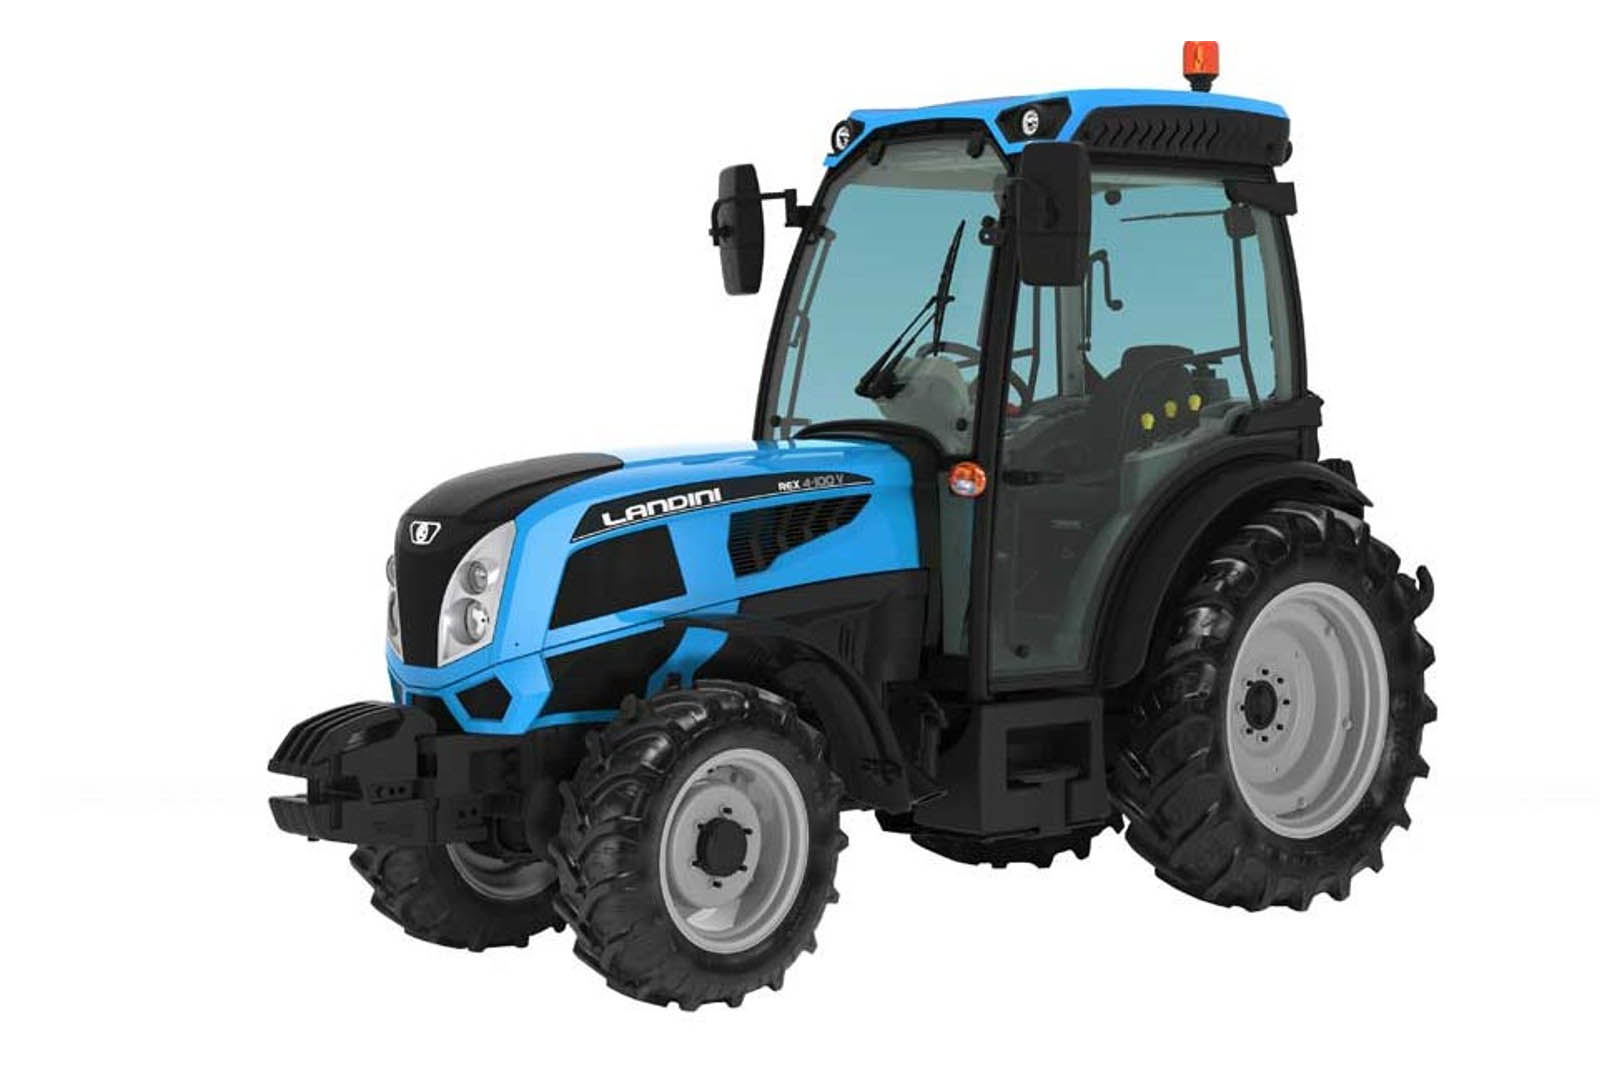 New Front Linkage & PTO Available for Landini REX 4 V-serie (Stage 5) - Frontlink